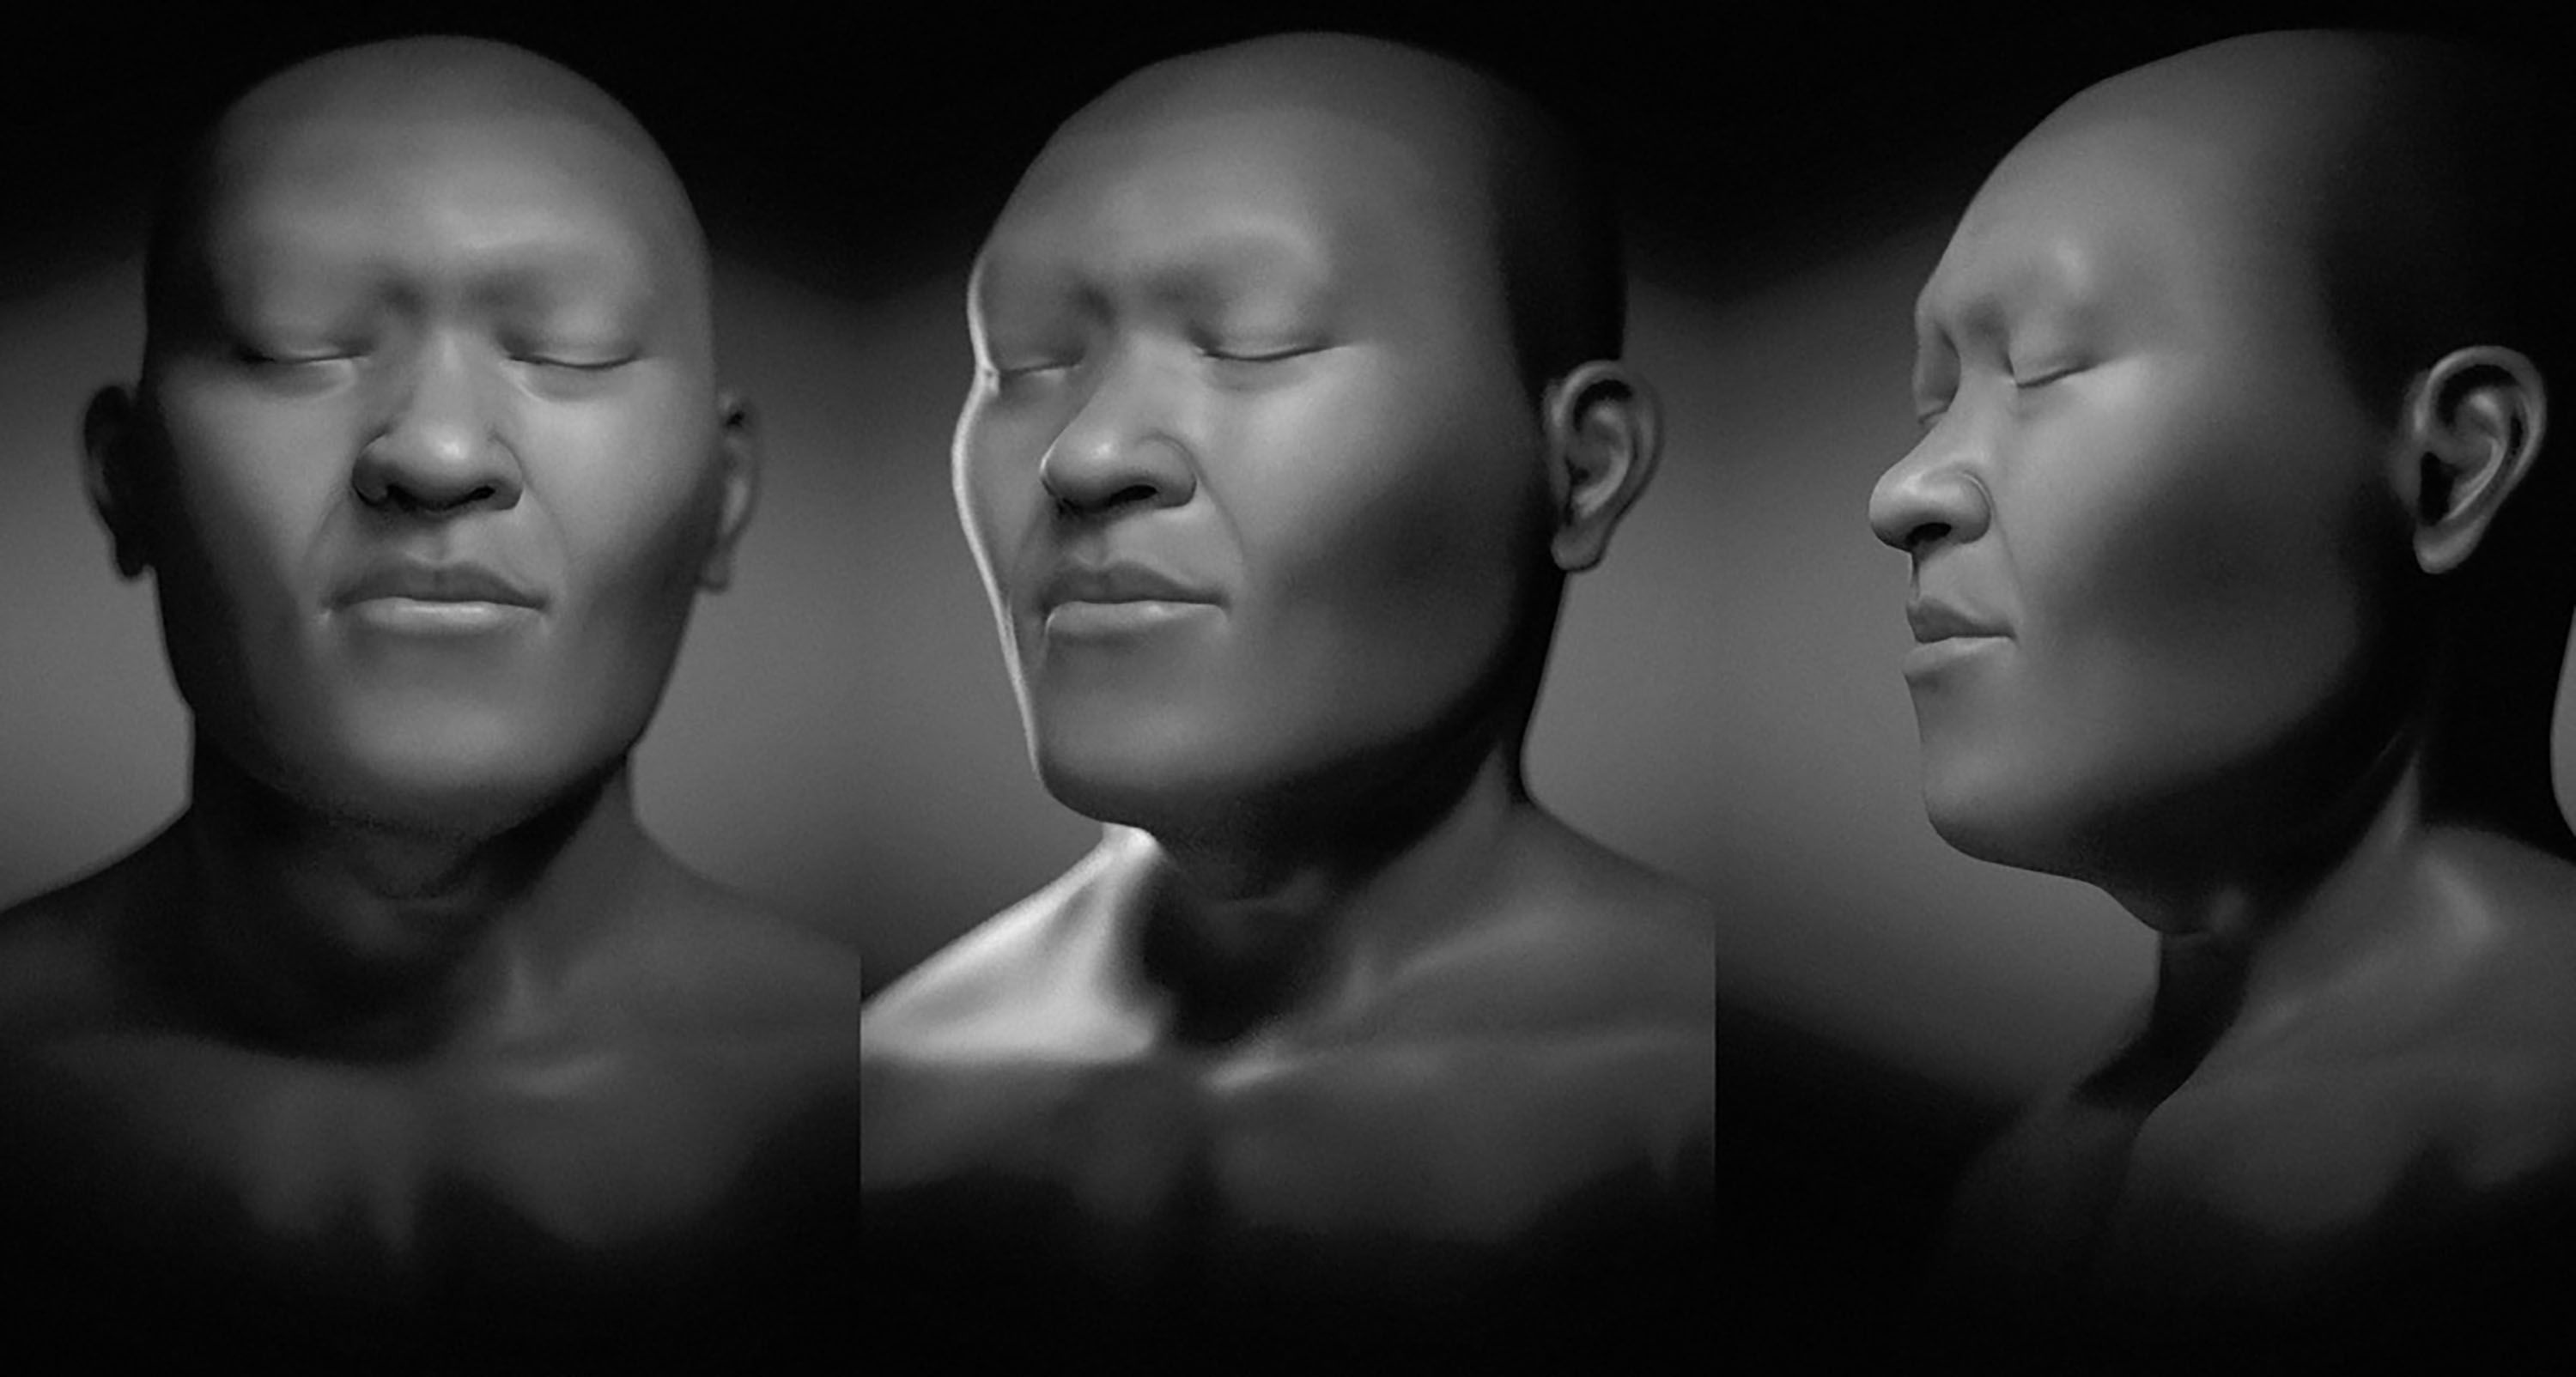 How 3D scanning helped reveal the face of the 3500-year-old